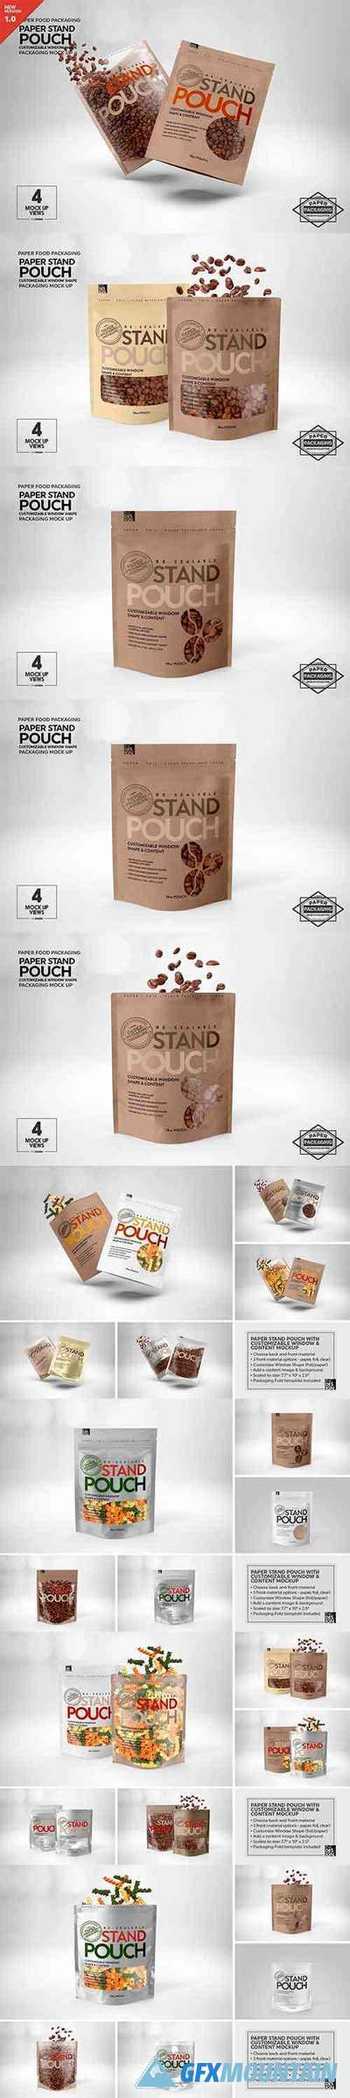 Paper Zip 18oz Pouch Packaging Mockup 5780121